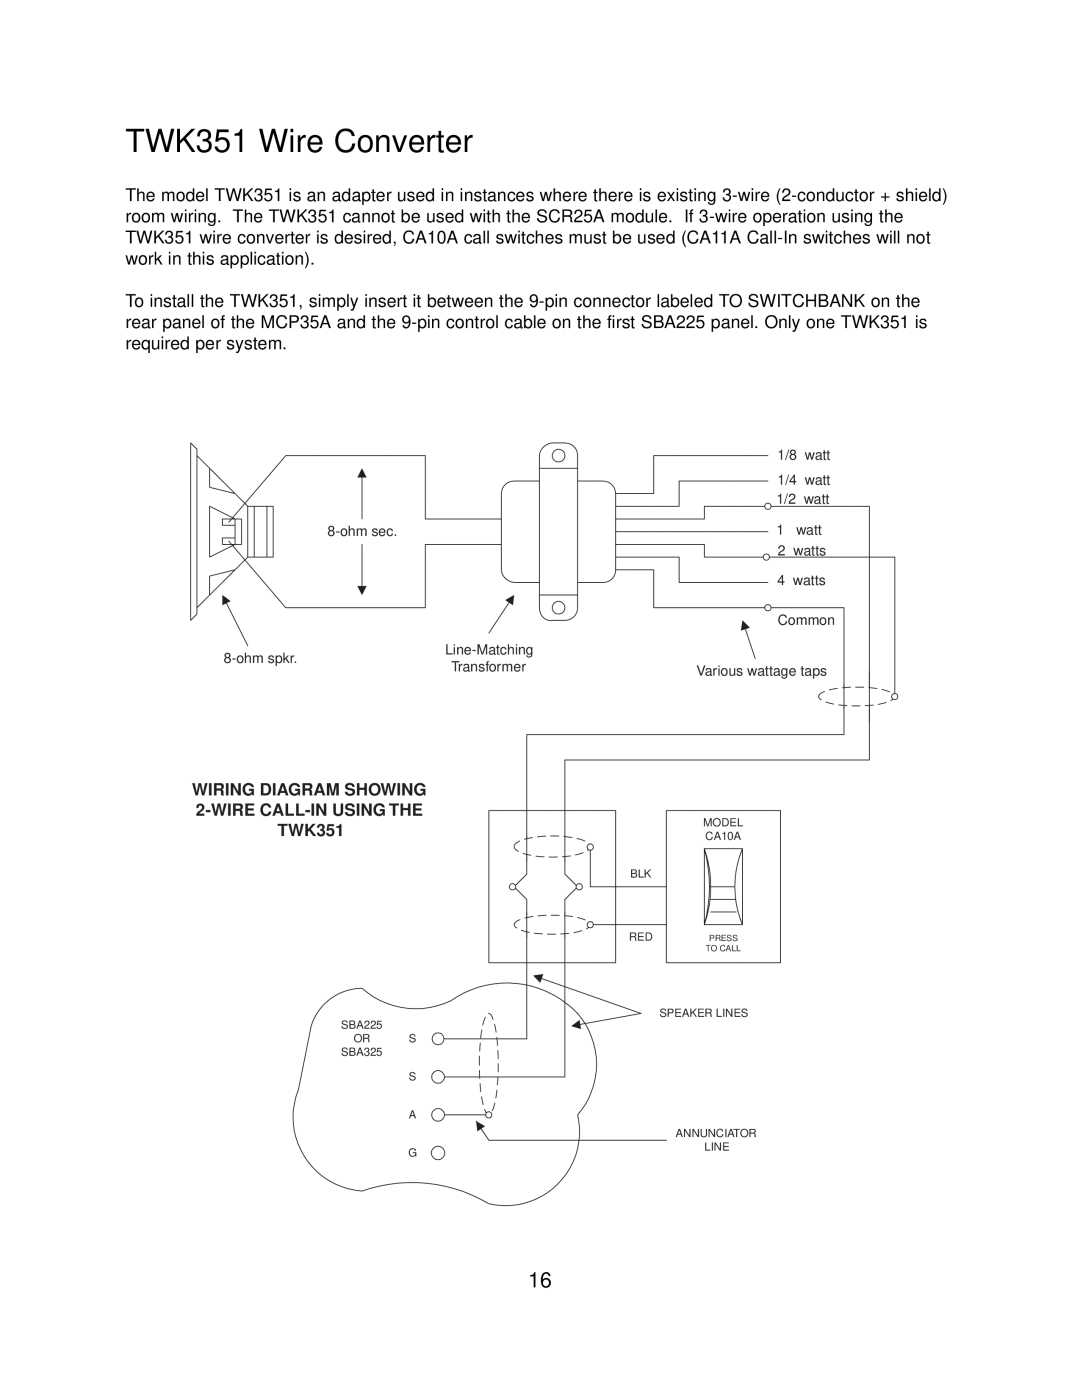 Bogen SI35A, PI35A manual TWK351 Wire Converter, Wiring Diagram Showing, Wire Call-In Using The 